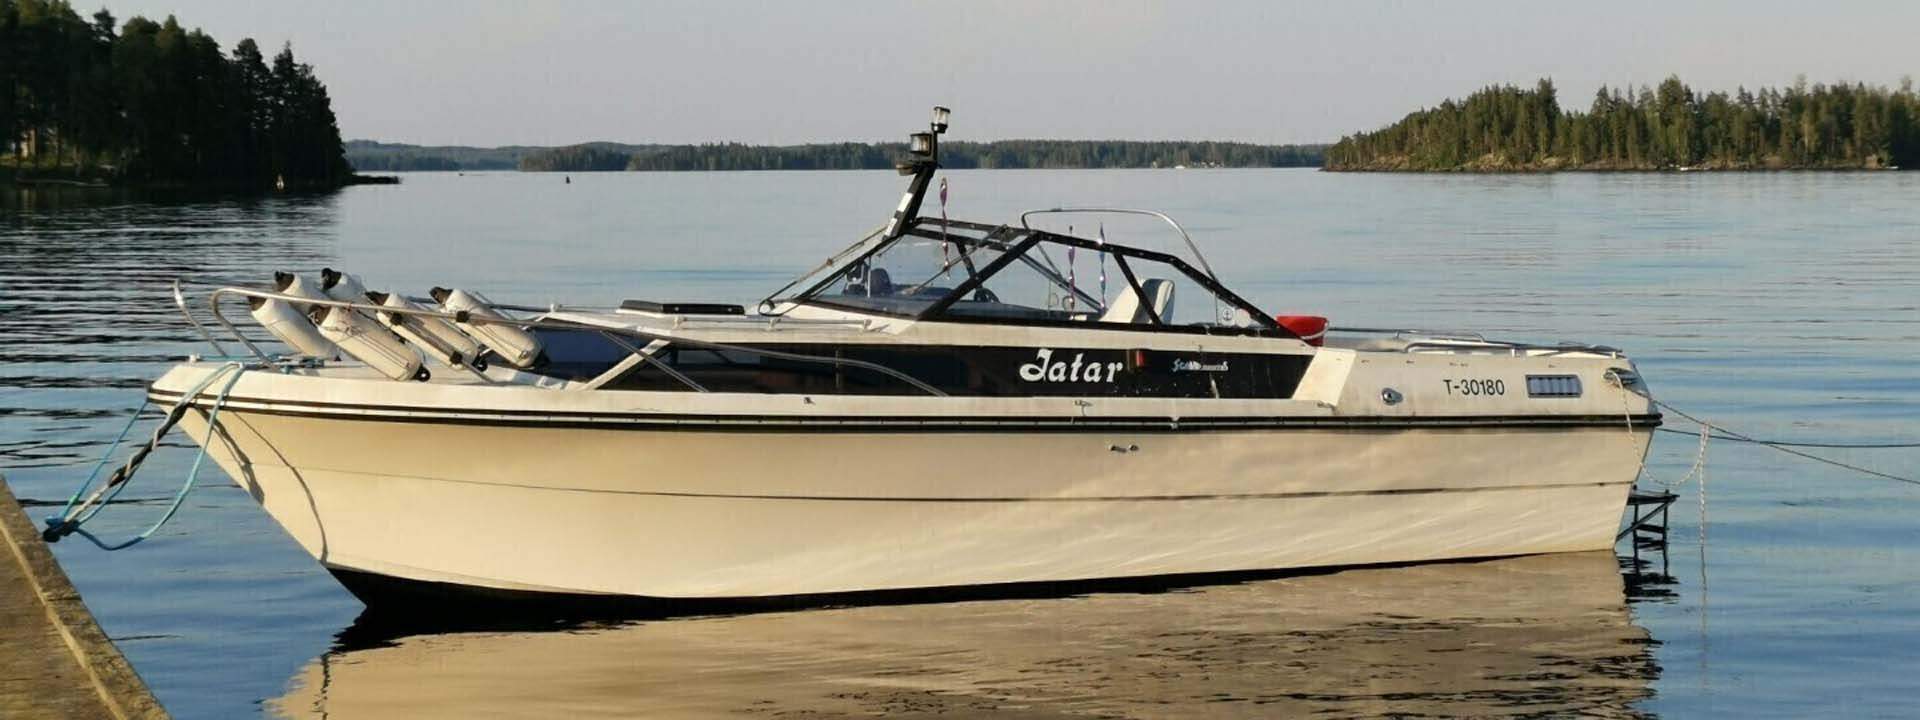 Scand boat